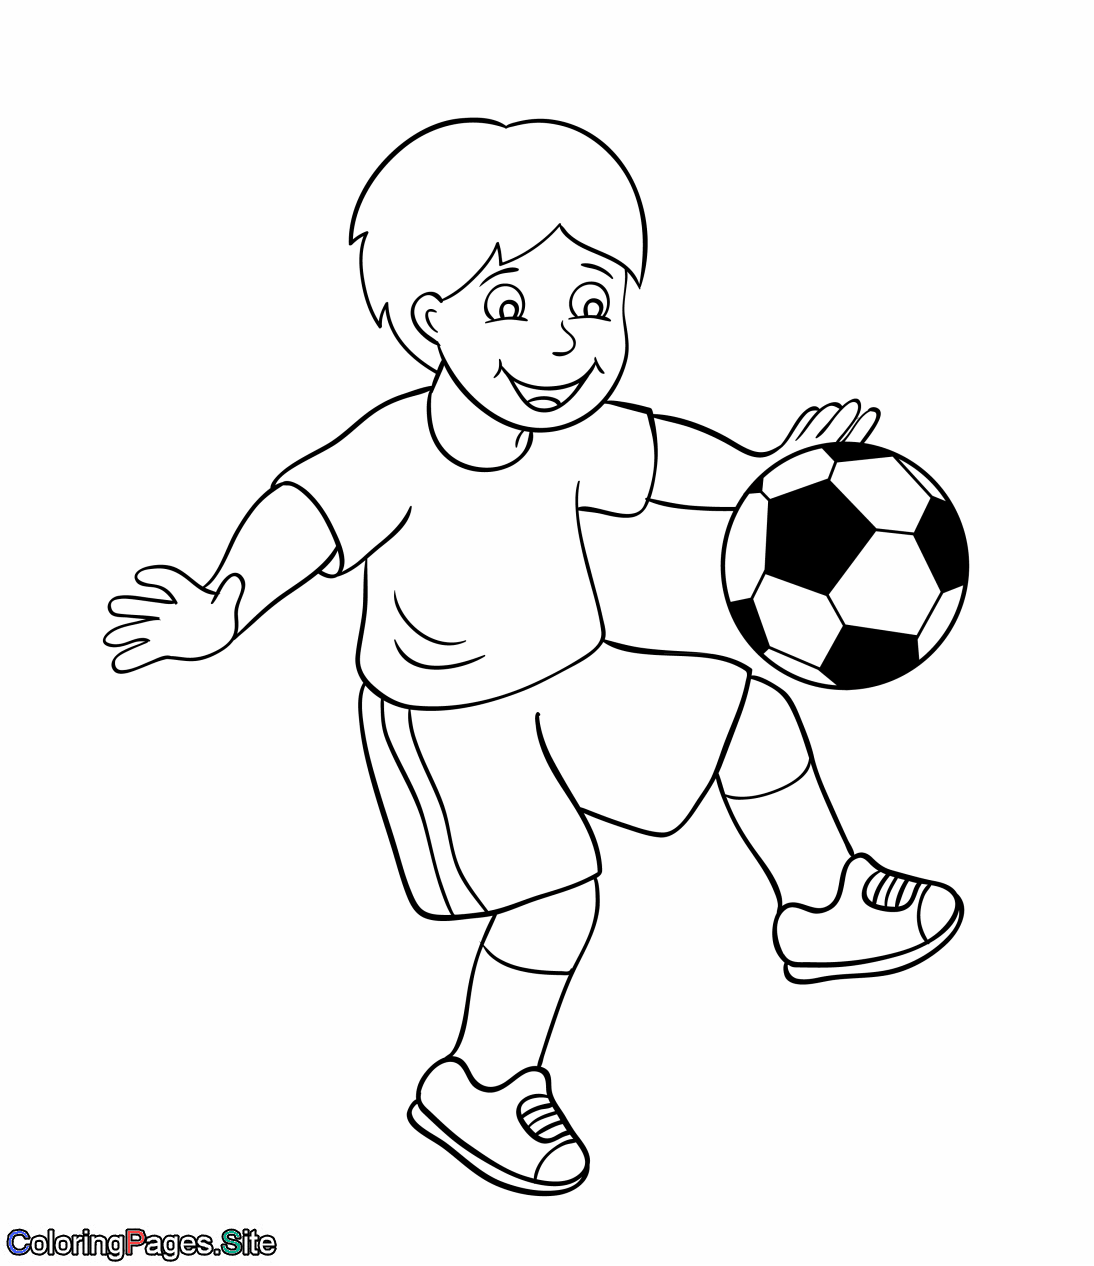 Boy bounces a soccer ball coloring page